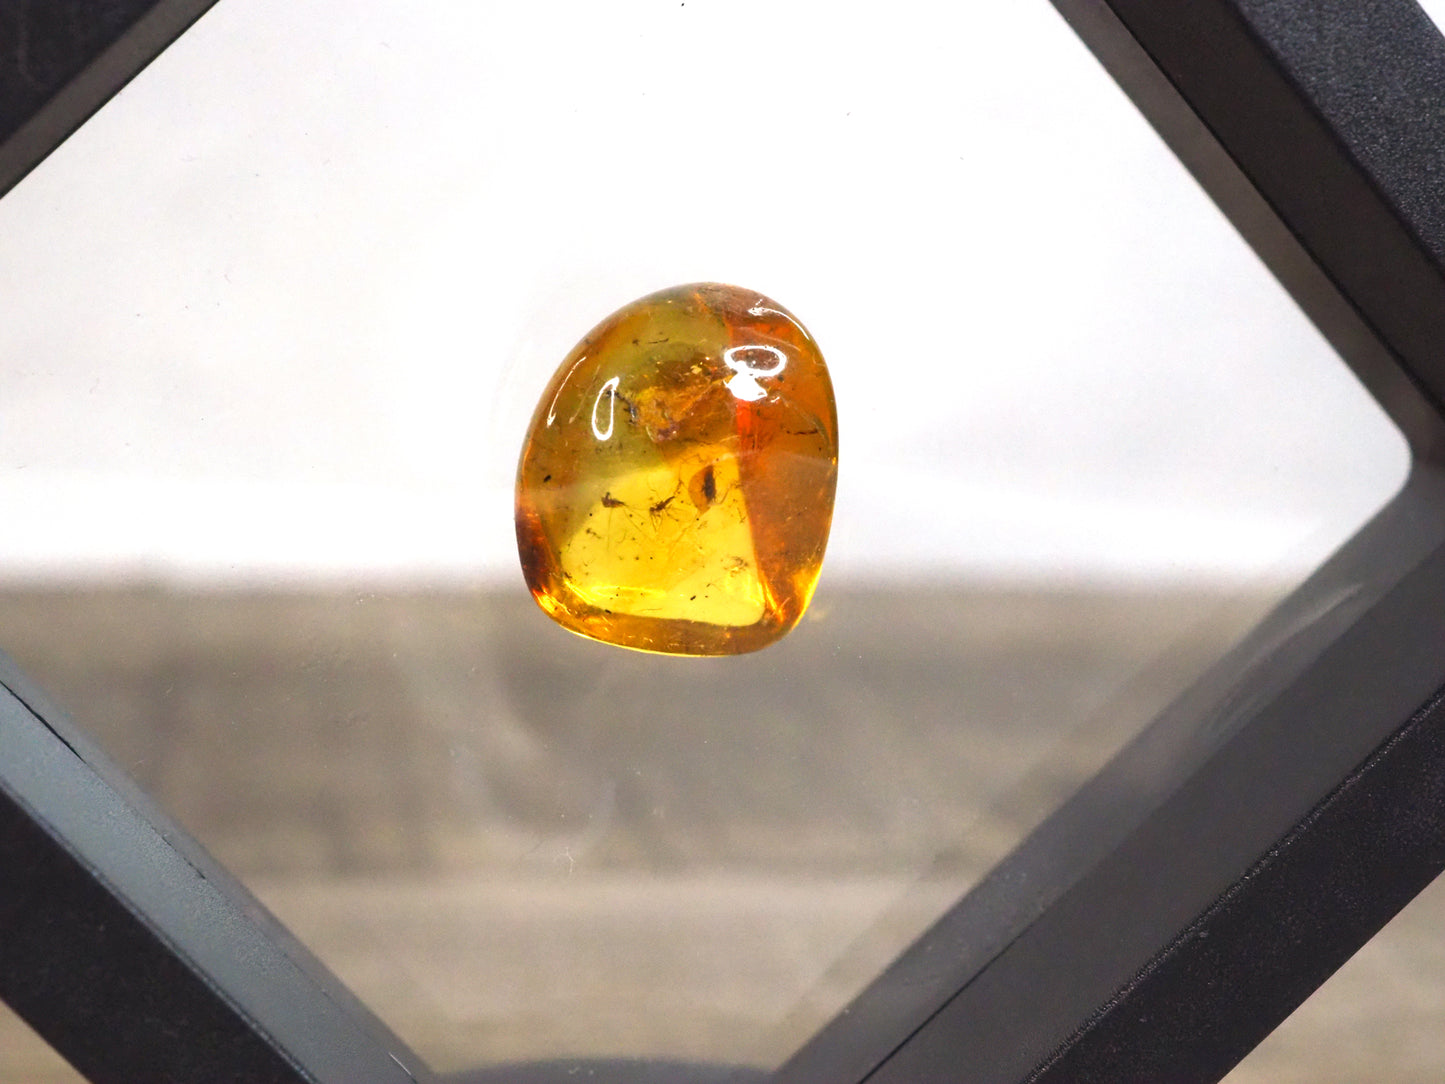 Baltic Amber B with Insect Inclusion